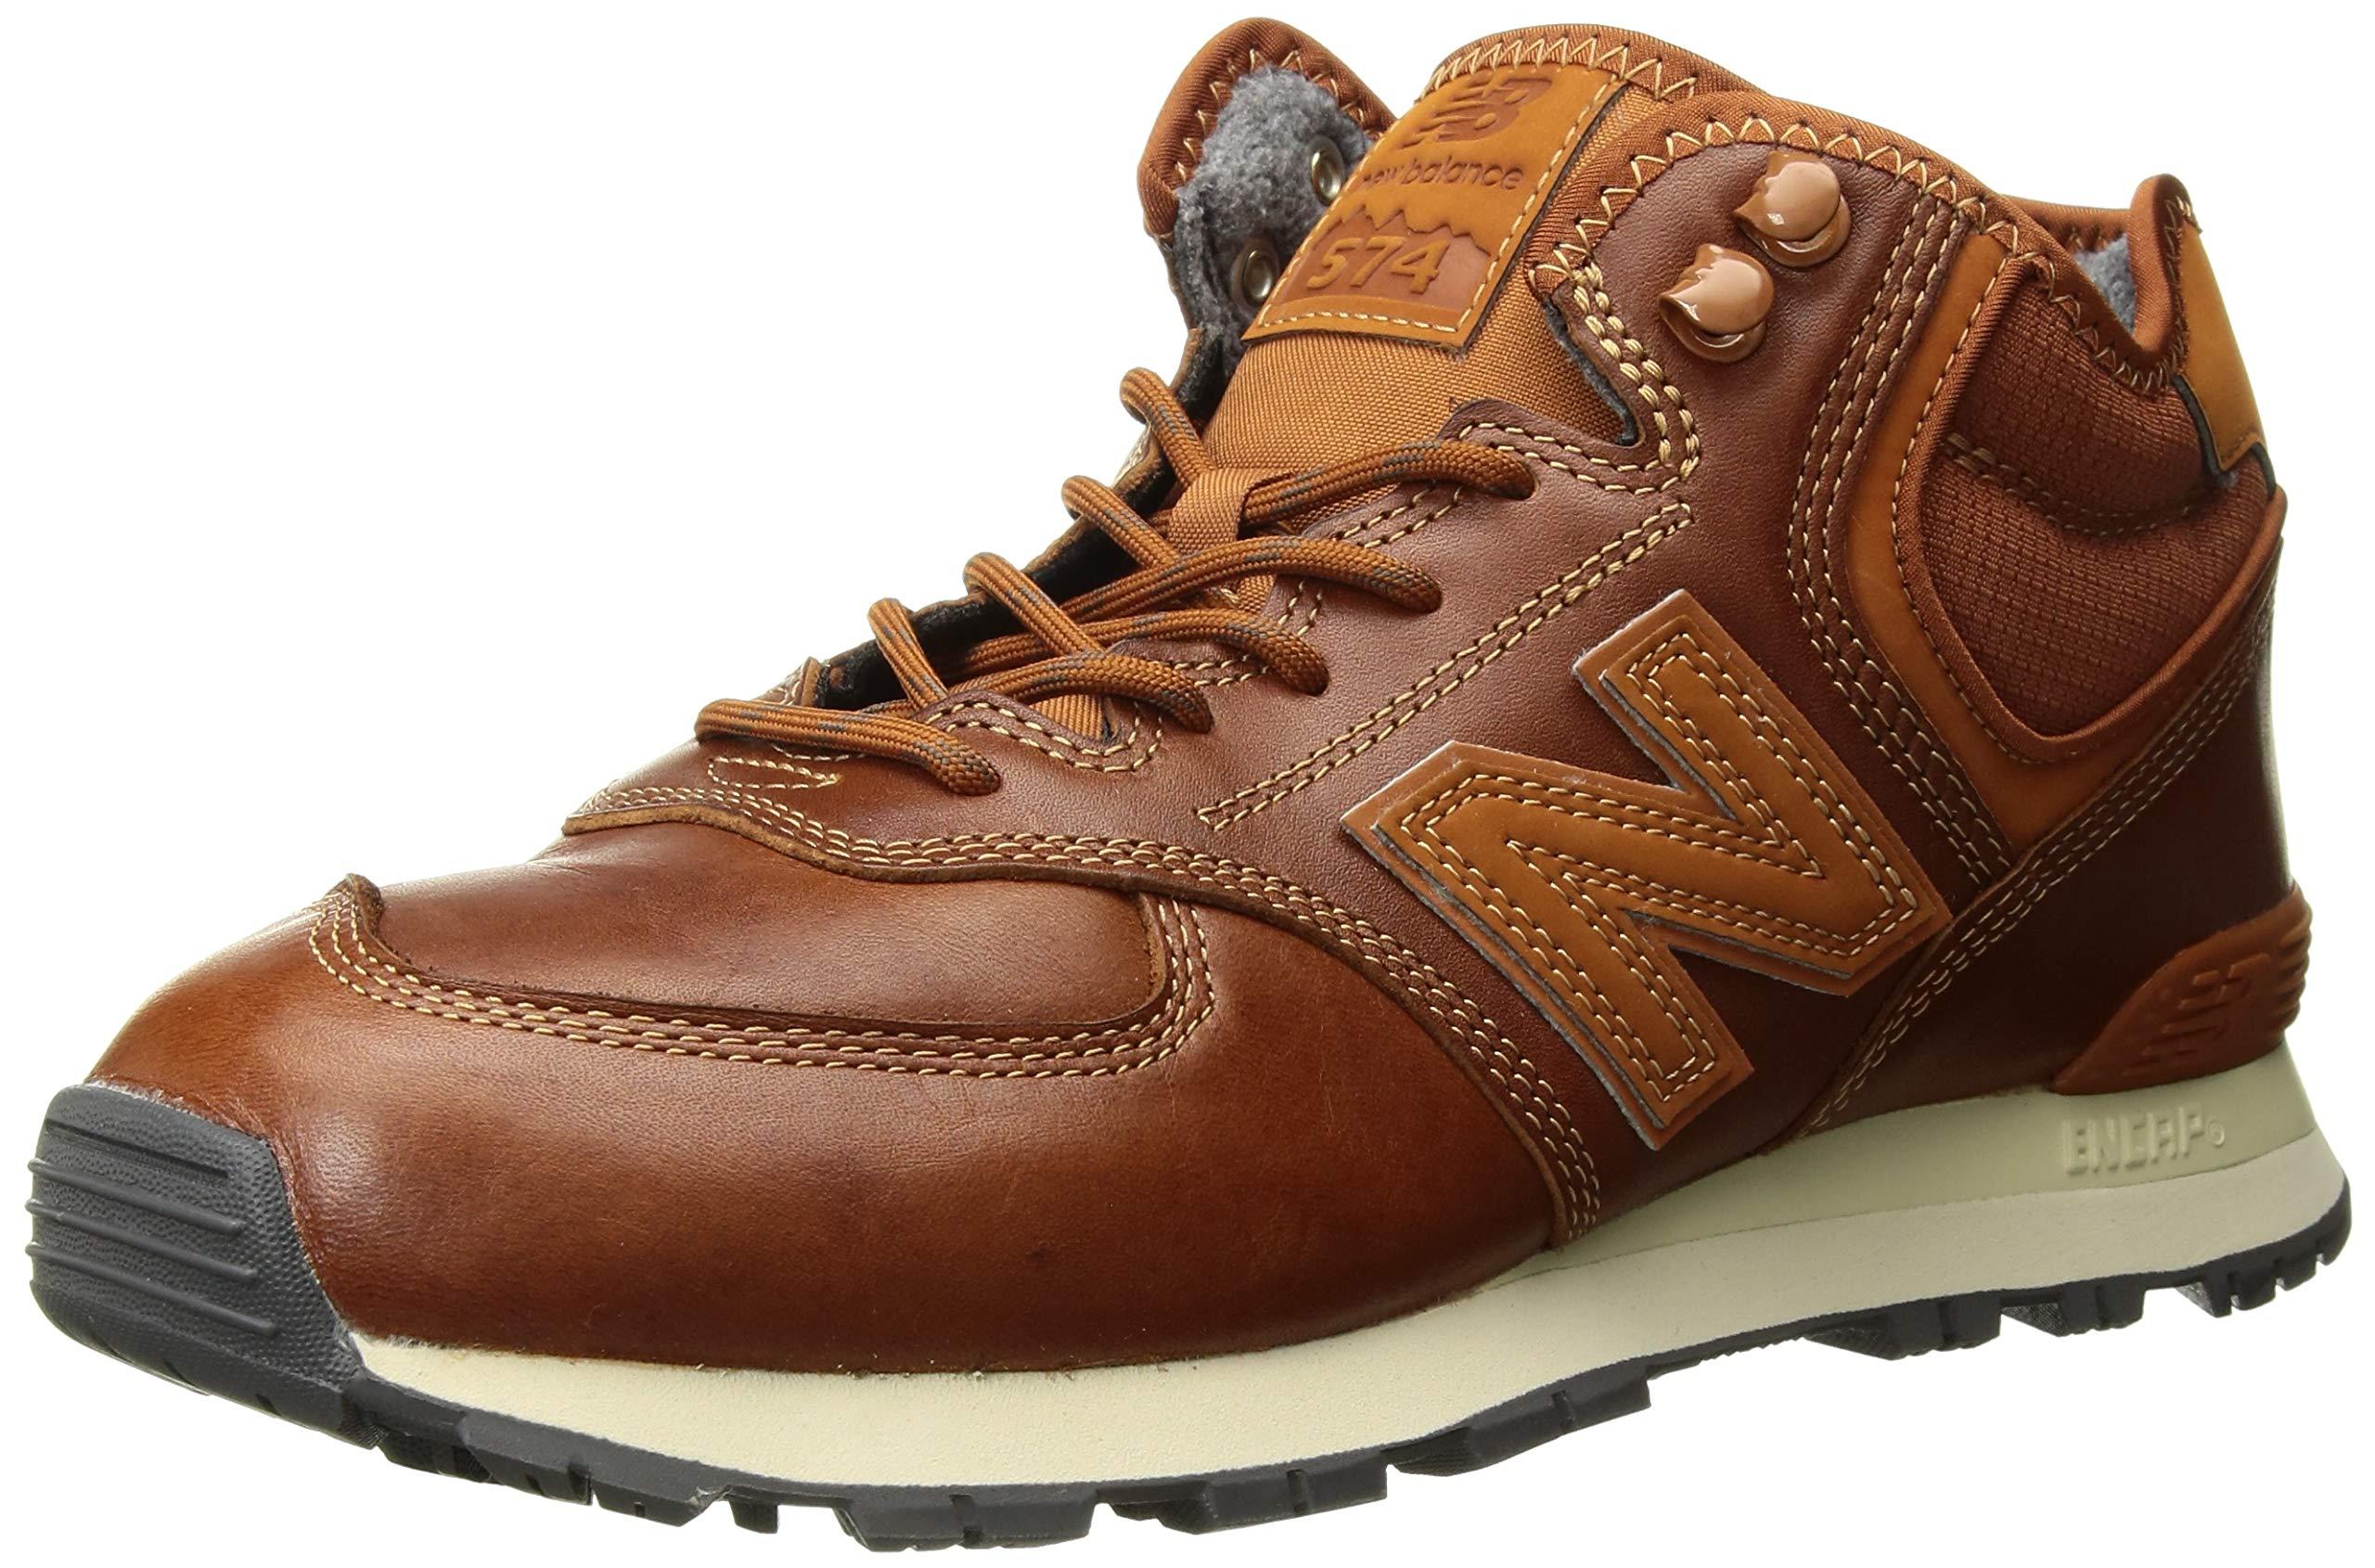 New Balance Iconic 574 Sneaker In Brown For Men | Lyst